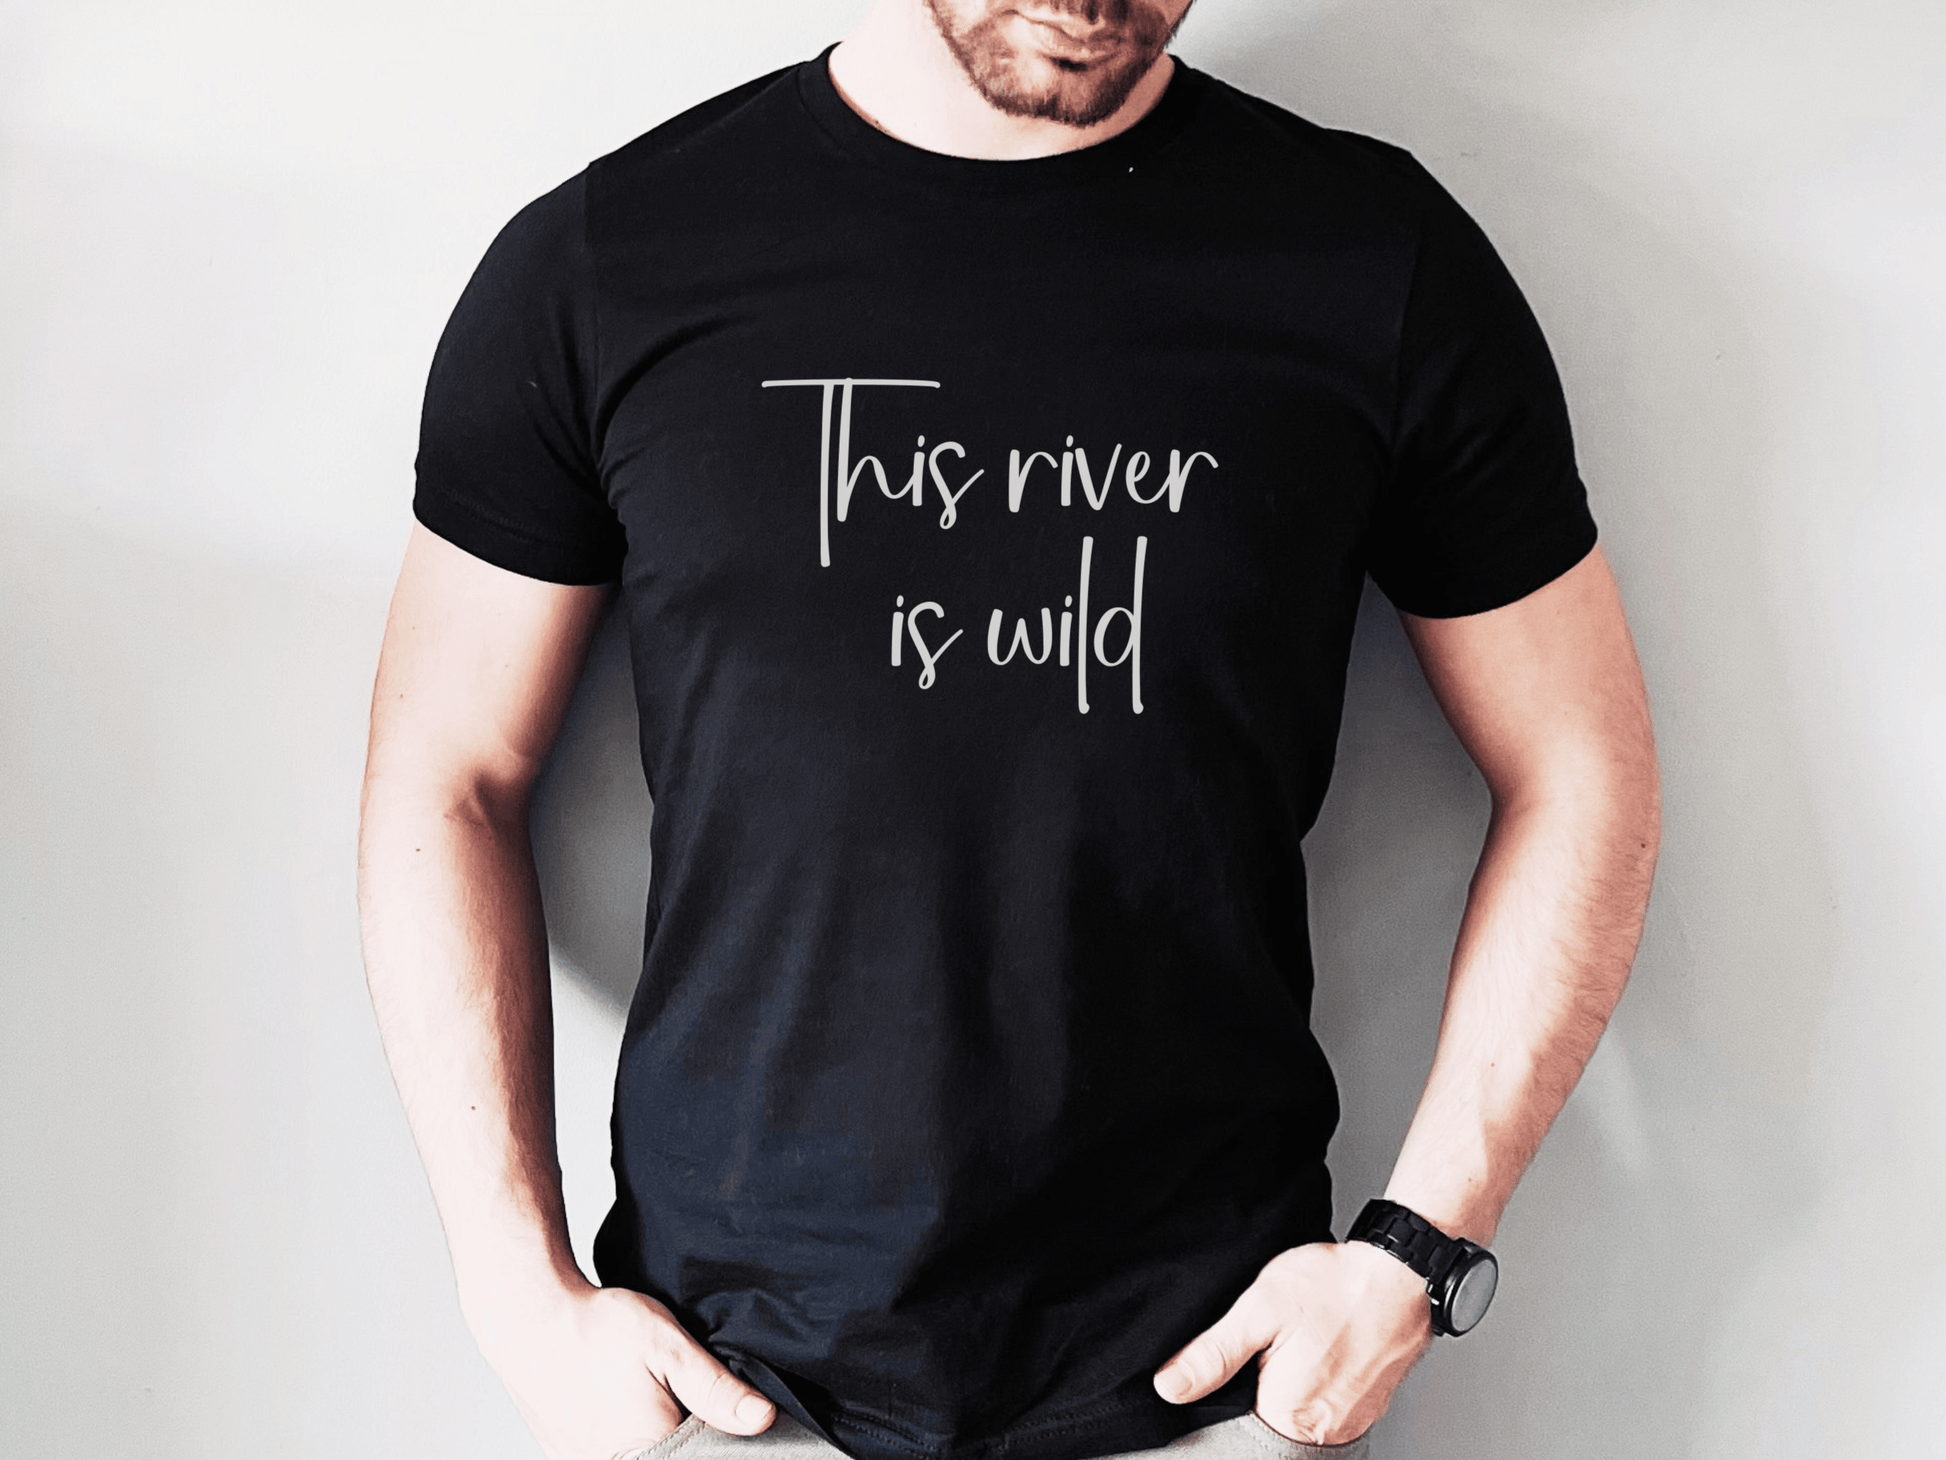 The KIllers "This River is Wild" T-Shirt in Black on a male